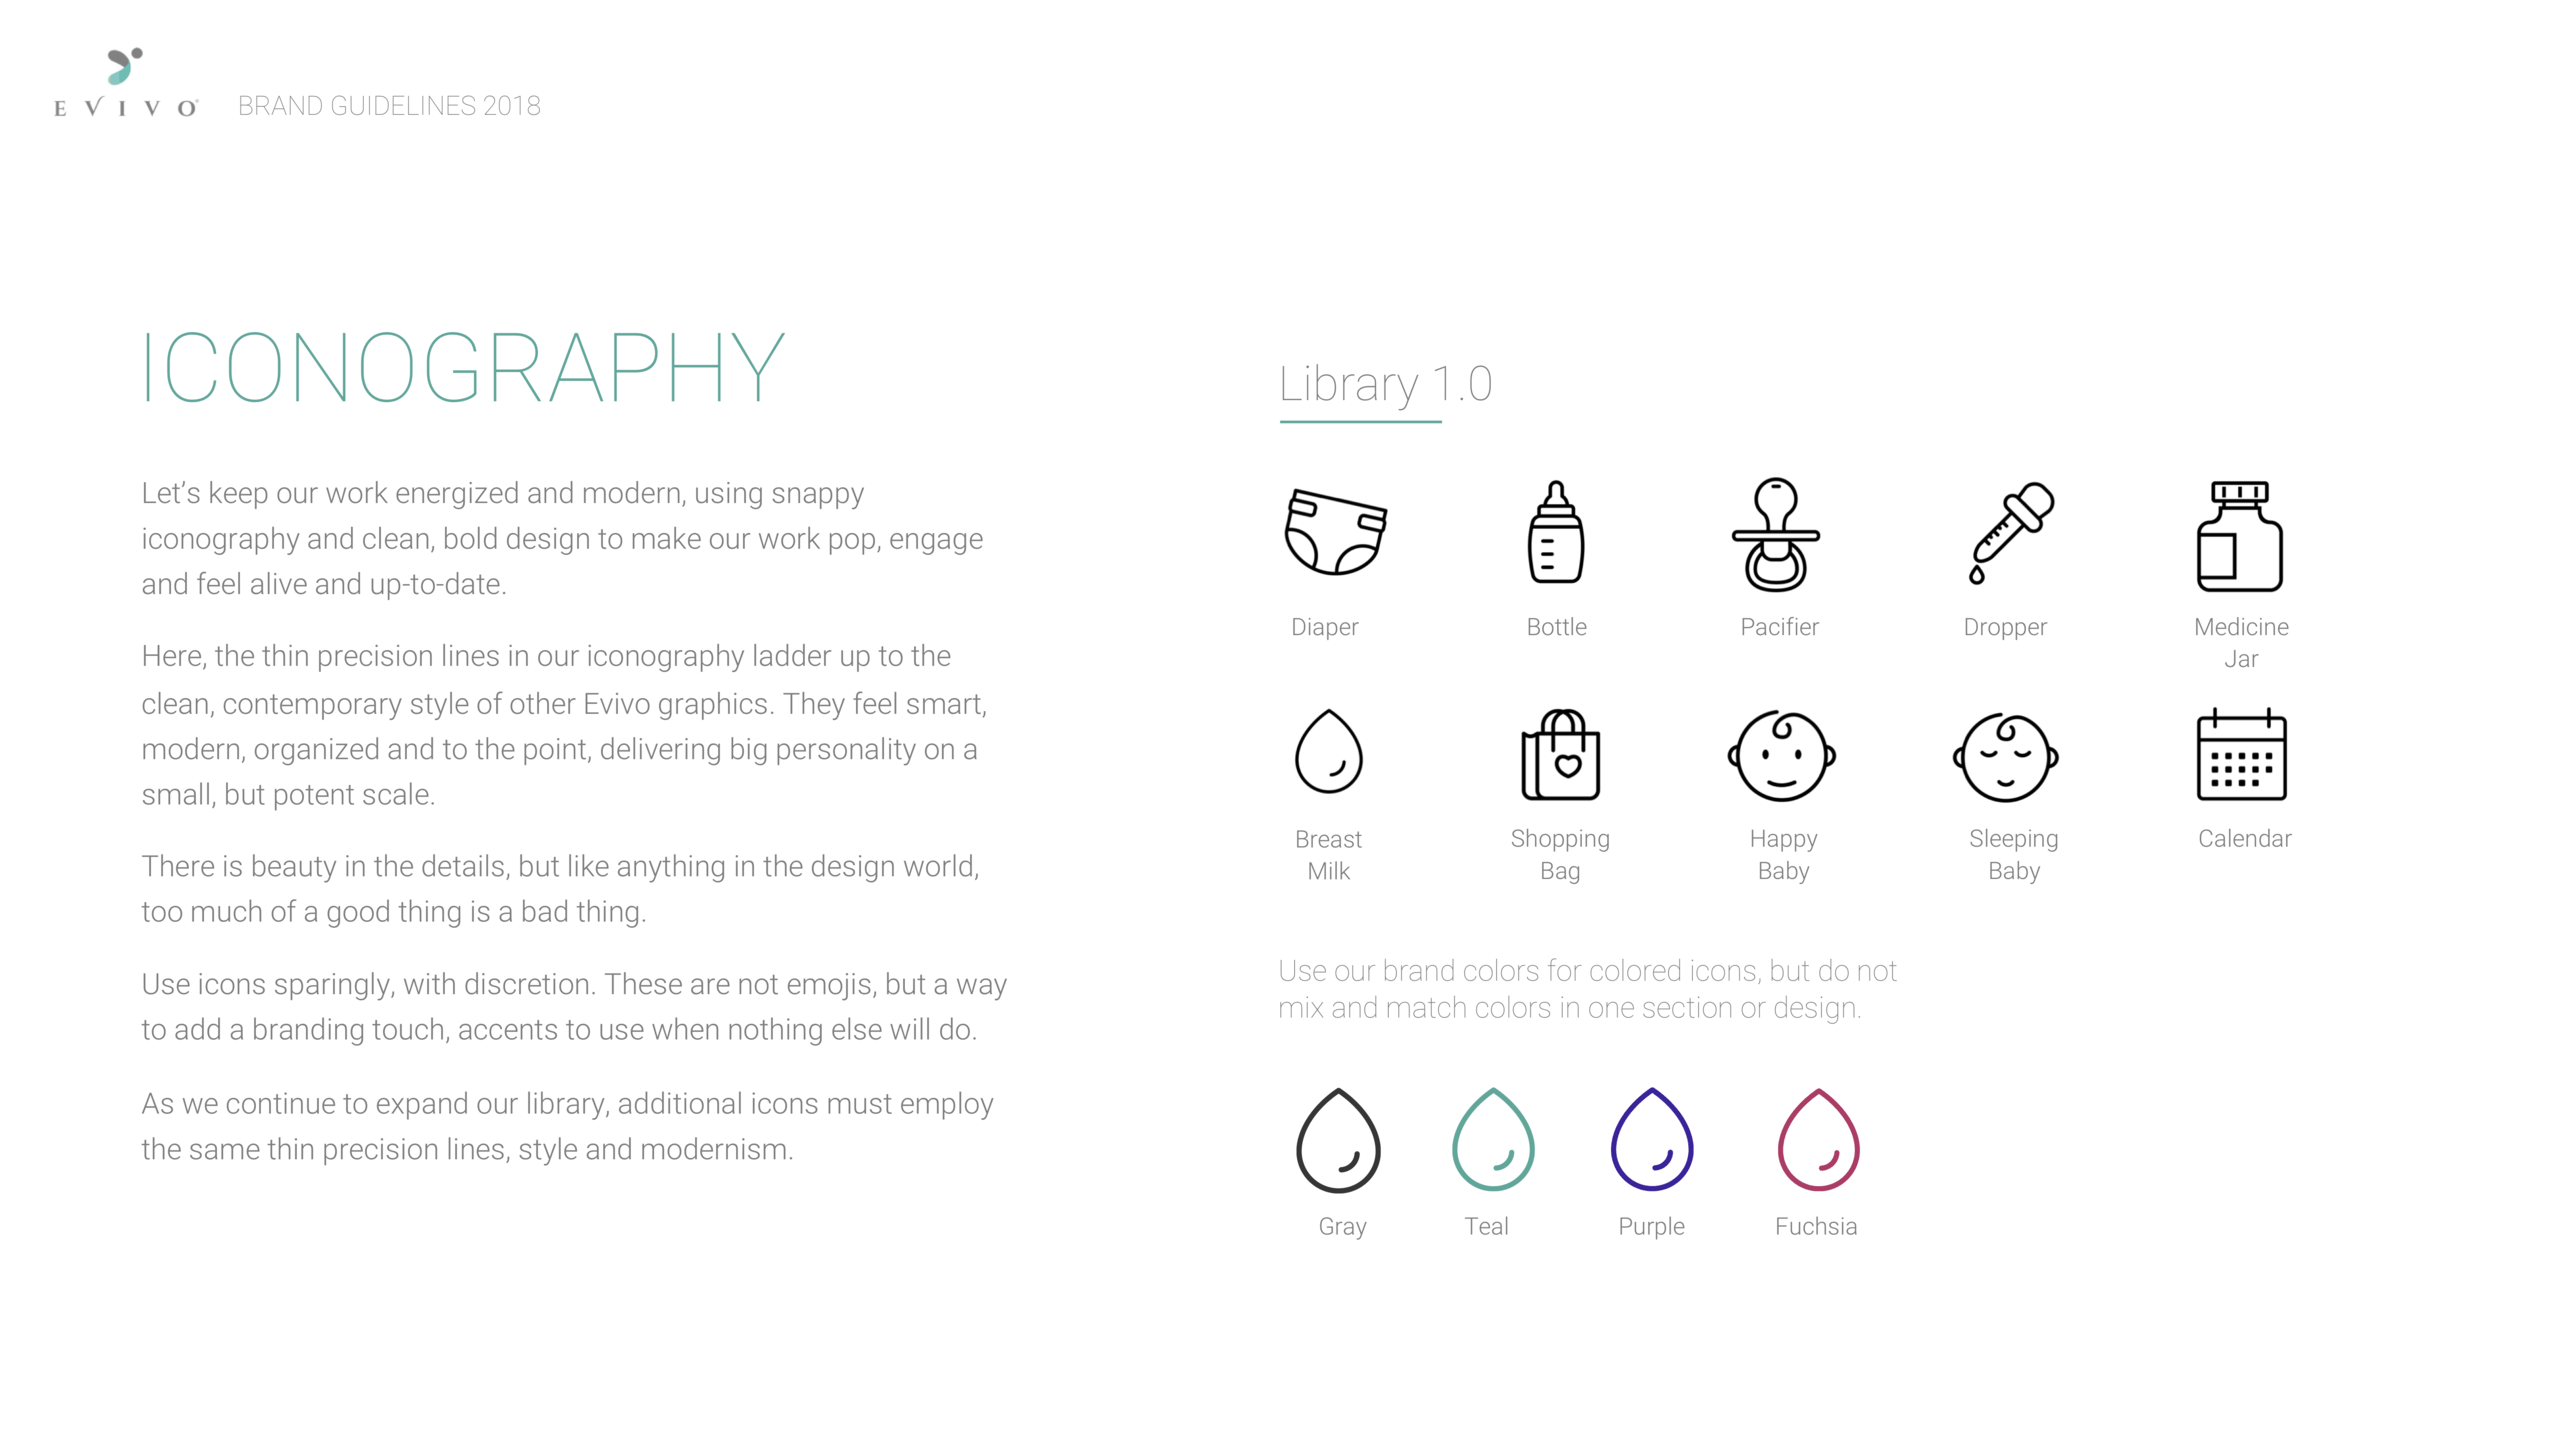 Evivo Brand Guidelines Image 4